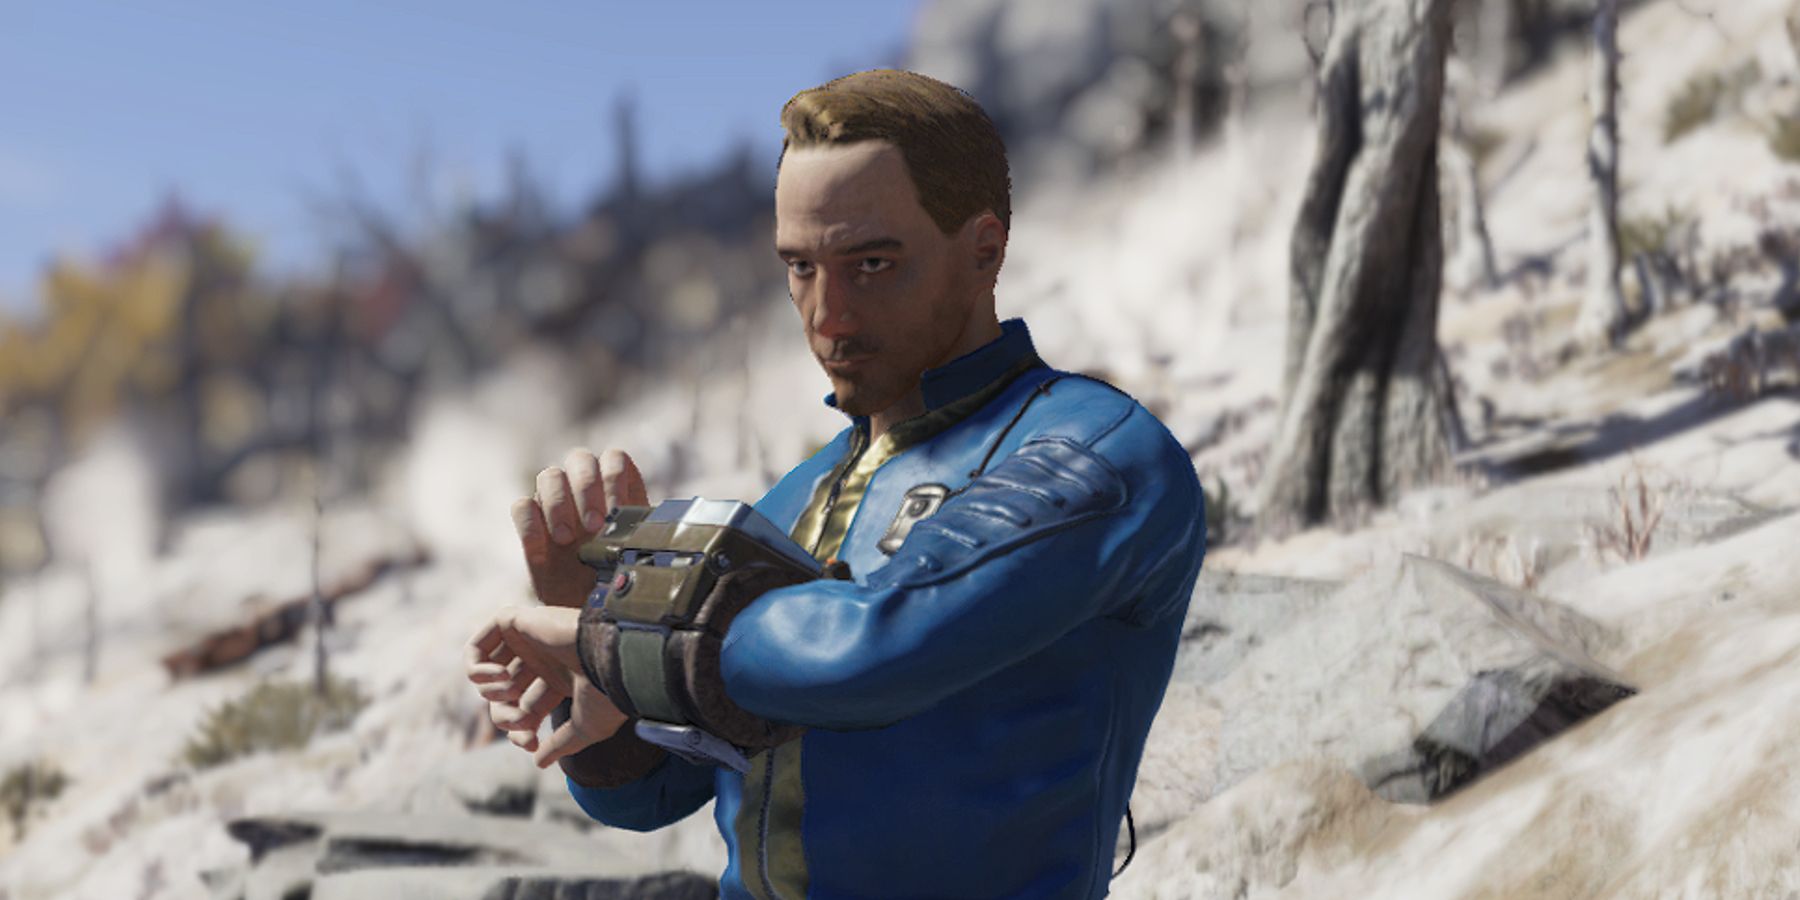 Fallout 76 player in Vault tech jumpsuit using Pip Boy